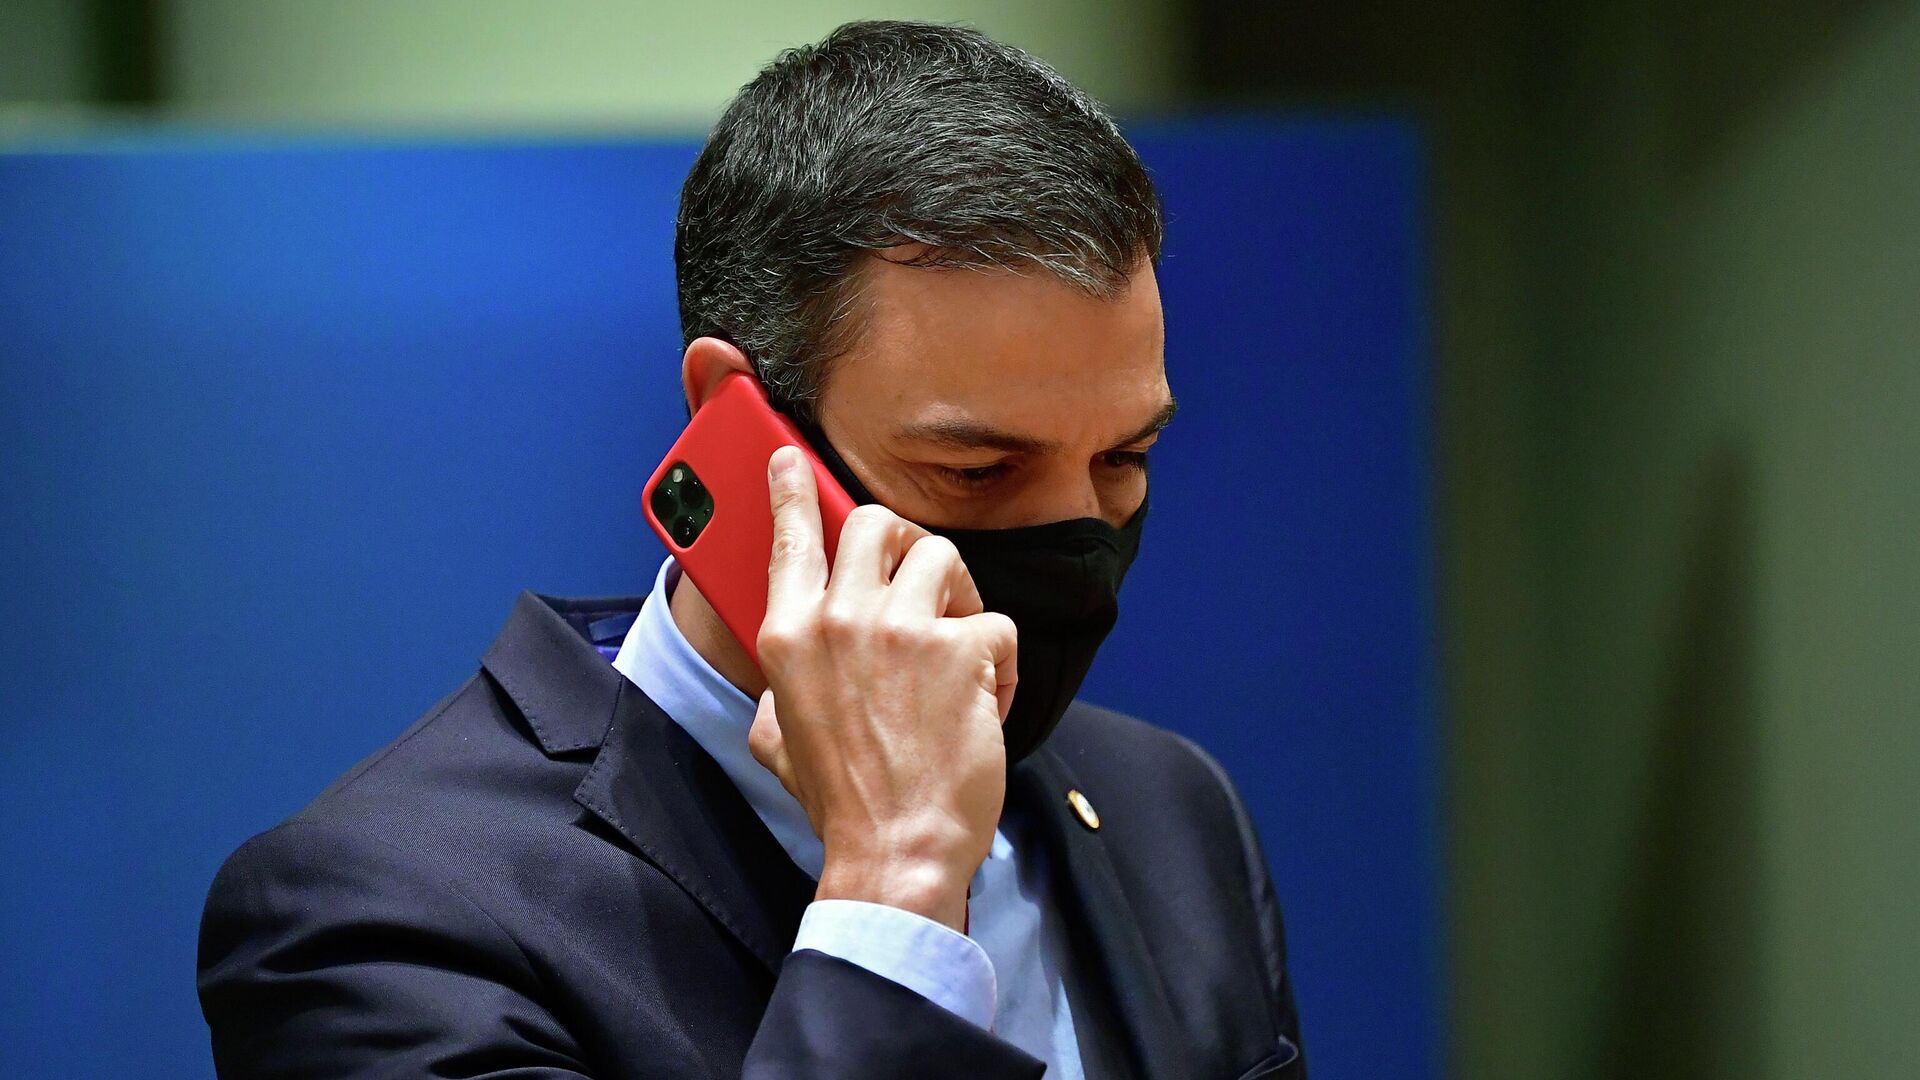 Spain's Prime Minister Pedro Sanchez speaks on his cell phone during a round table meeting at an EU summit in Brussels, Monday, July 20, 2020. - Sputnik International, 1920, 10.05.2022